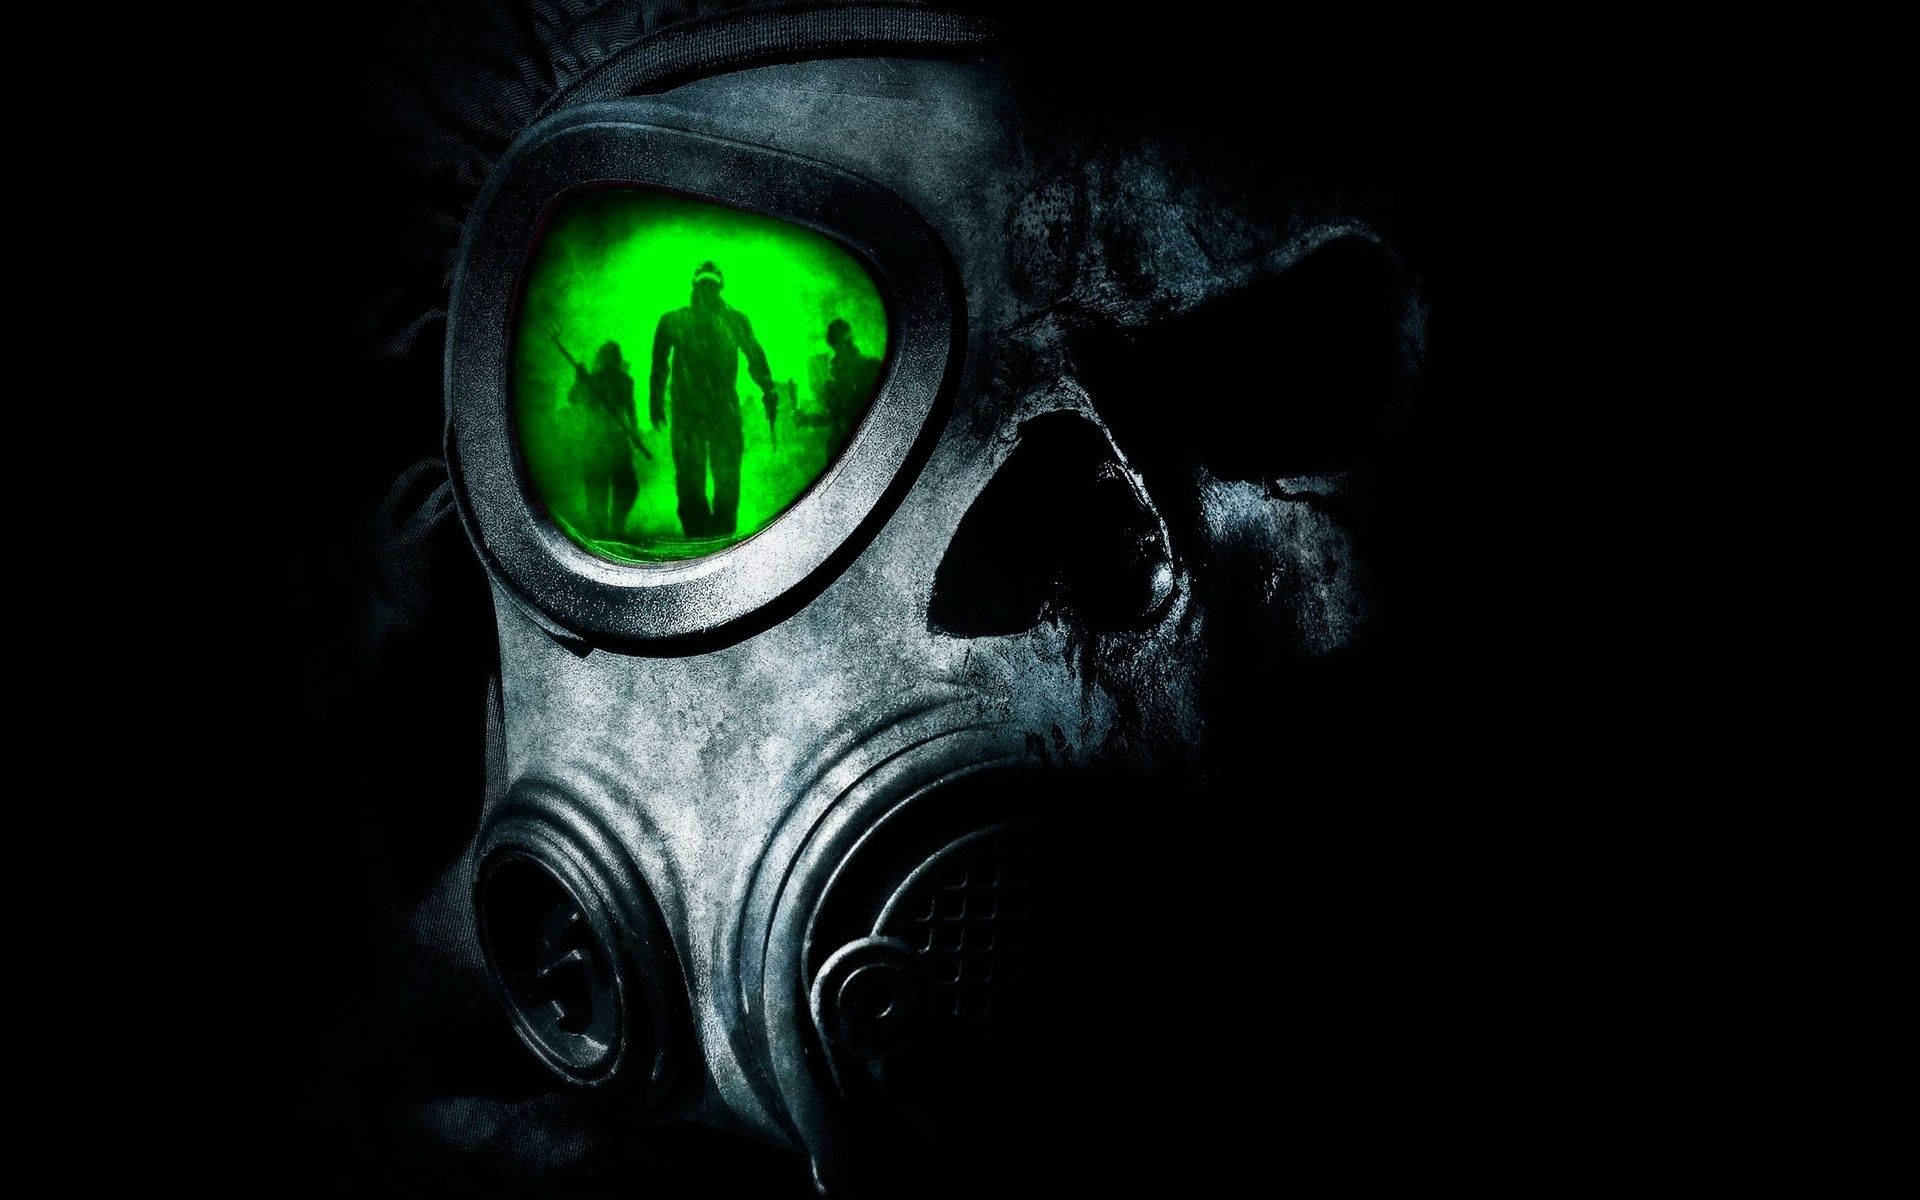 Mystery Gas Mask Graphic Art Picture